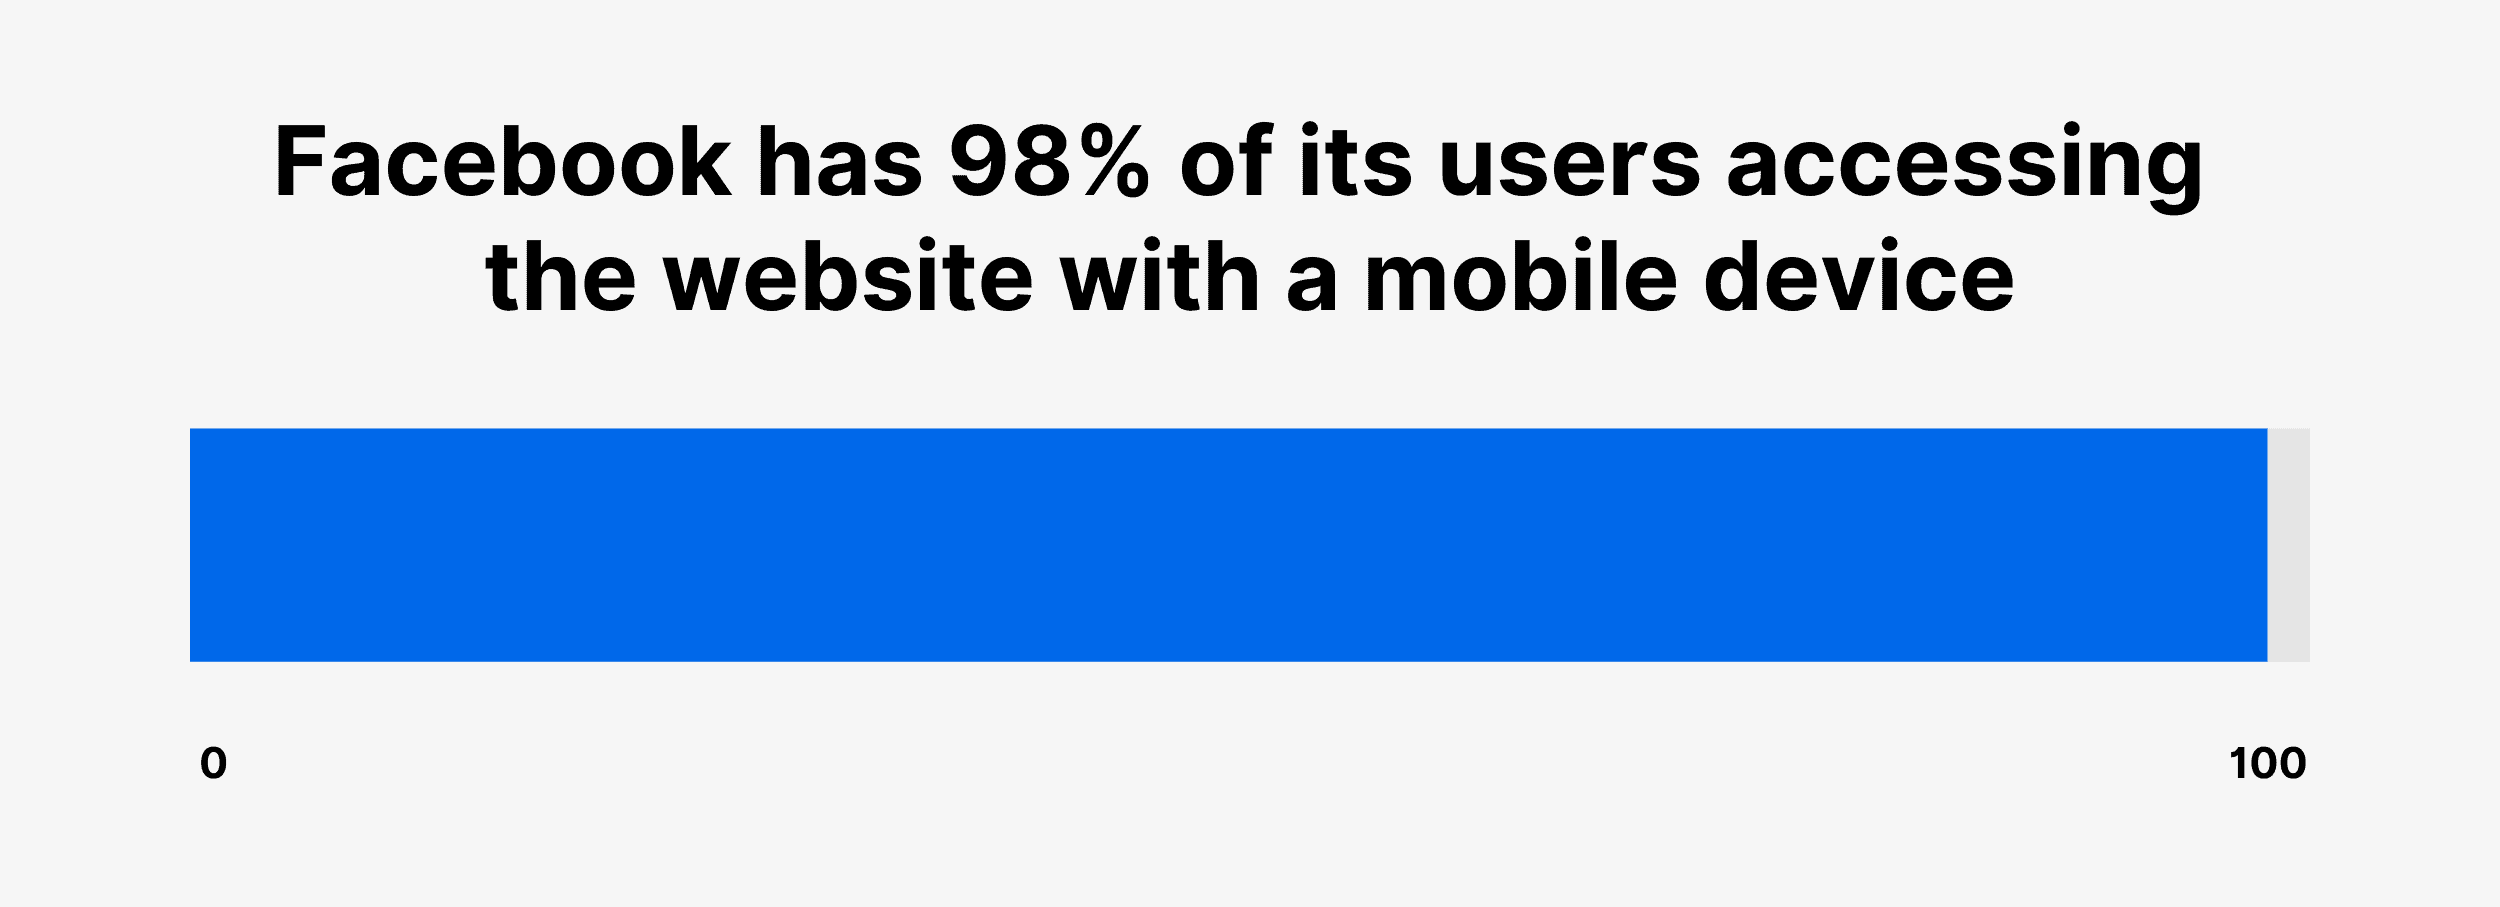 Facebook has 98% of its users accessing the website with a mobile device